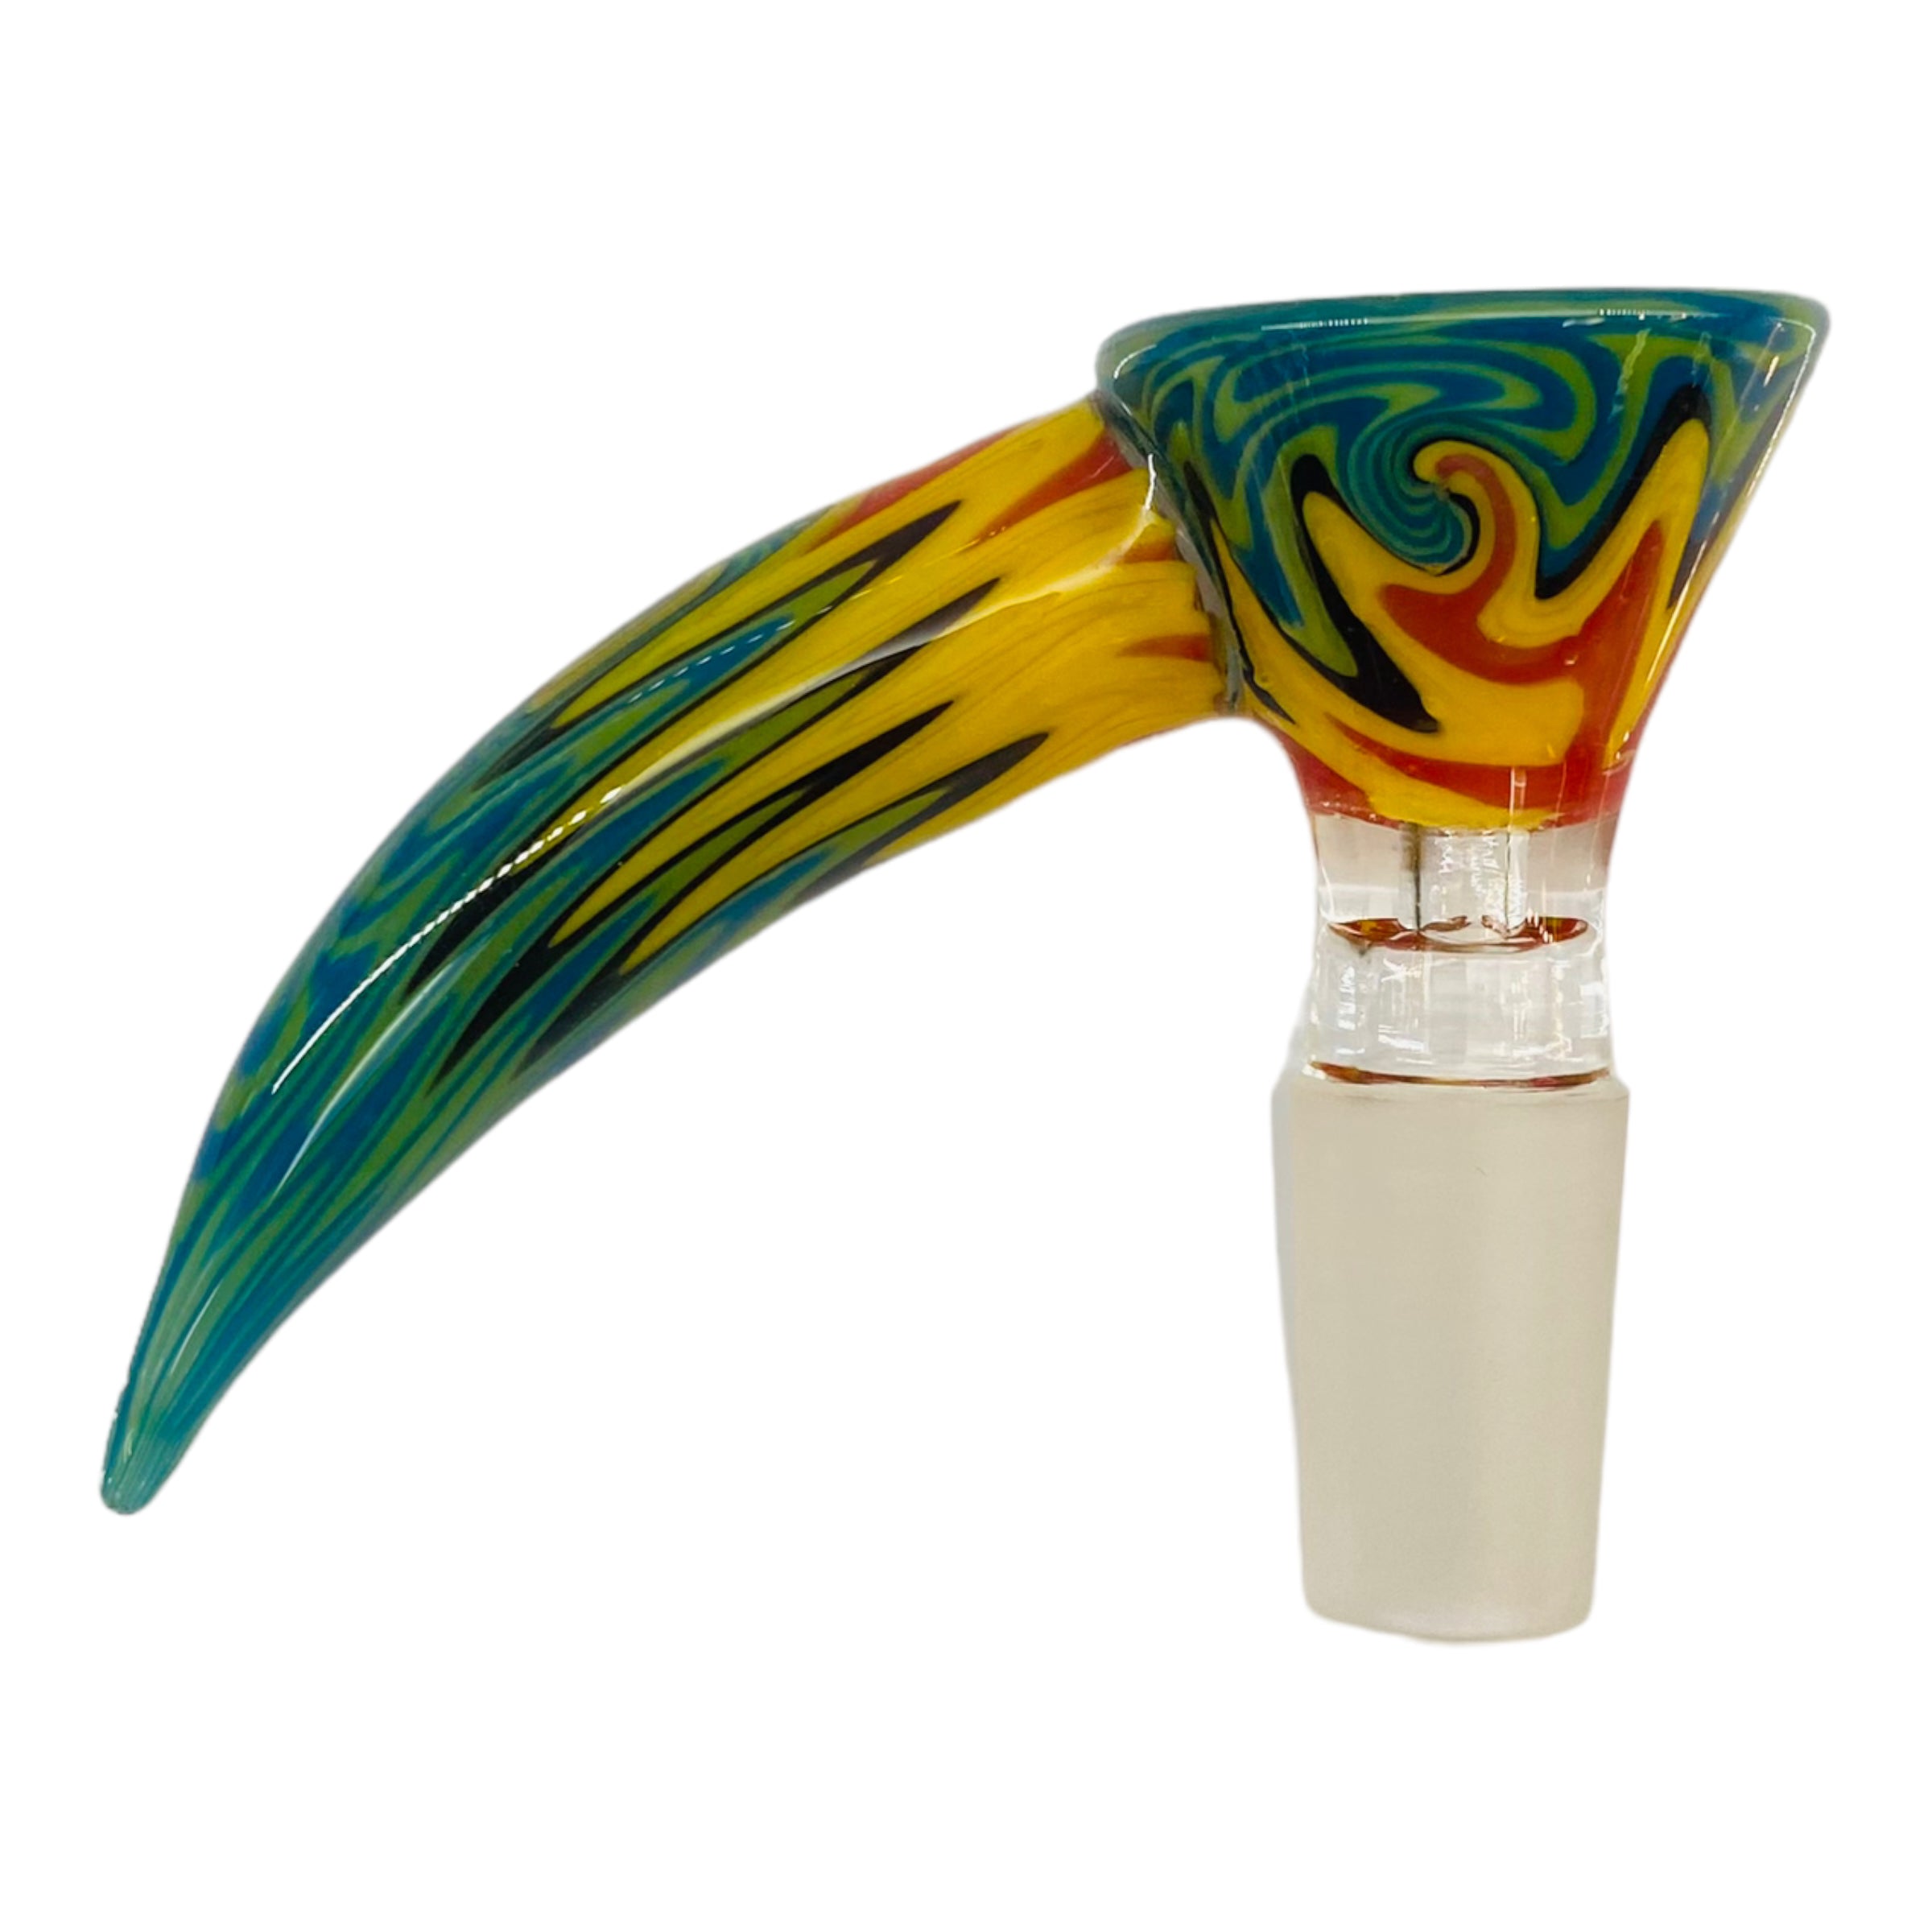 14mm Flower Bowls - Large Horn Martini Bong Bowl Piece With Color Wig Wag - Rasta Swirl